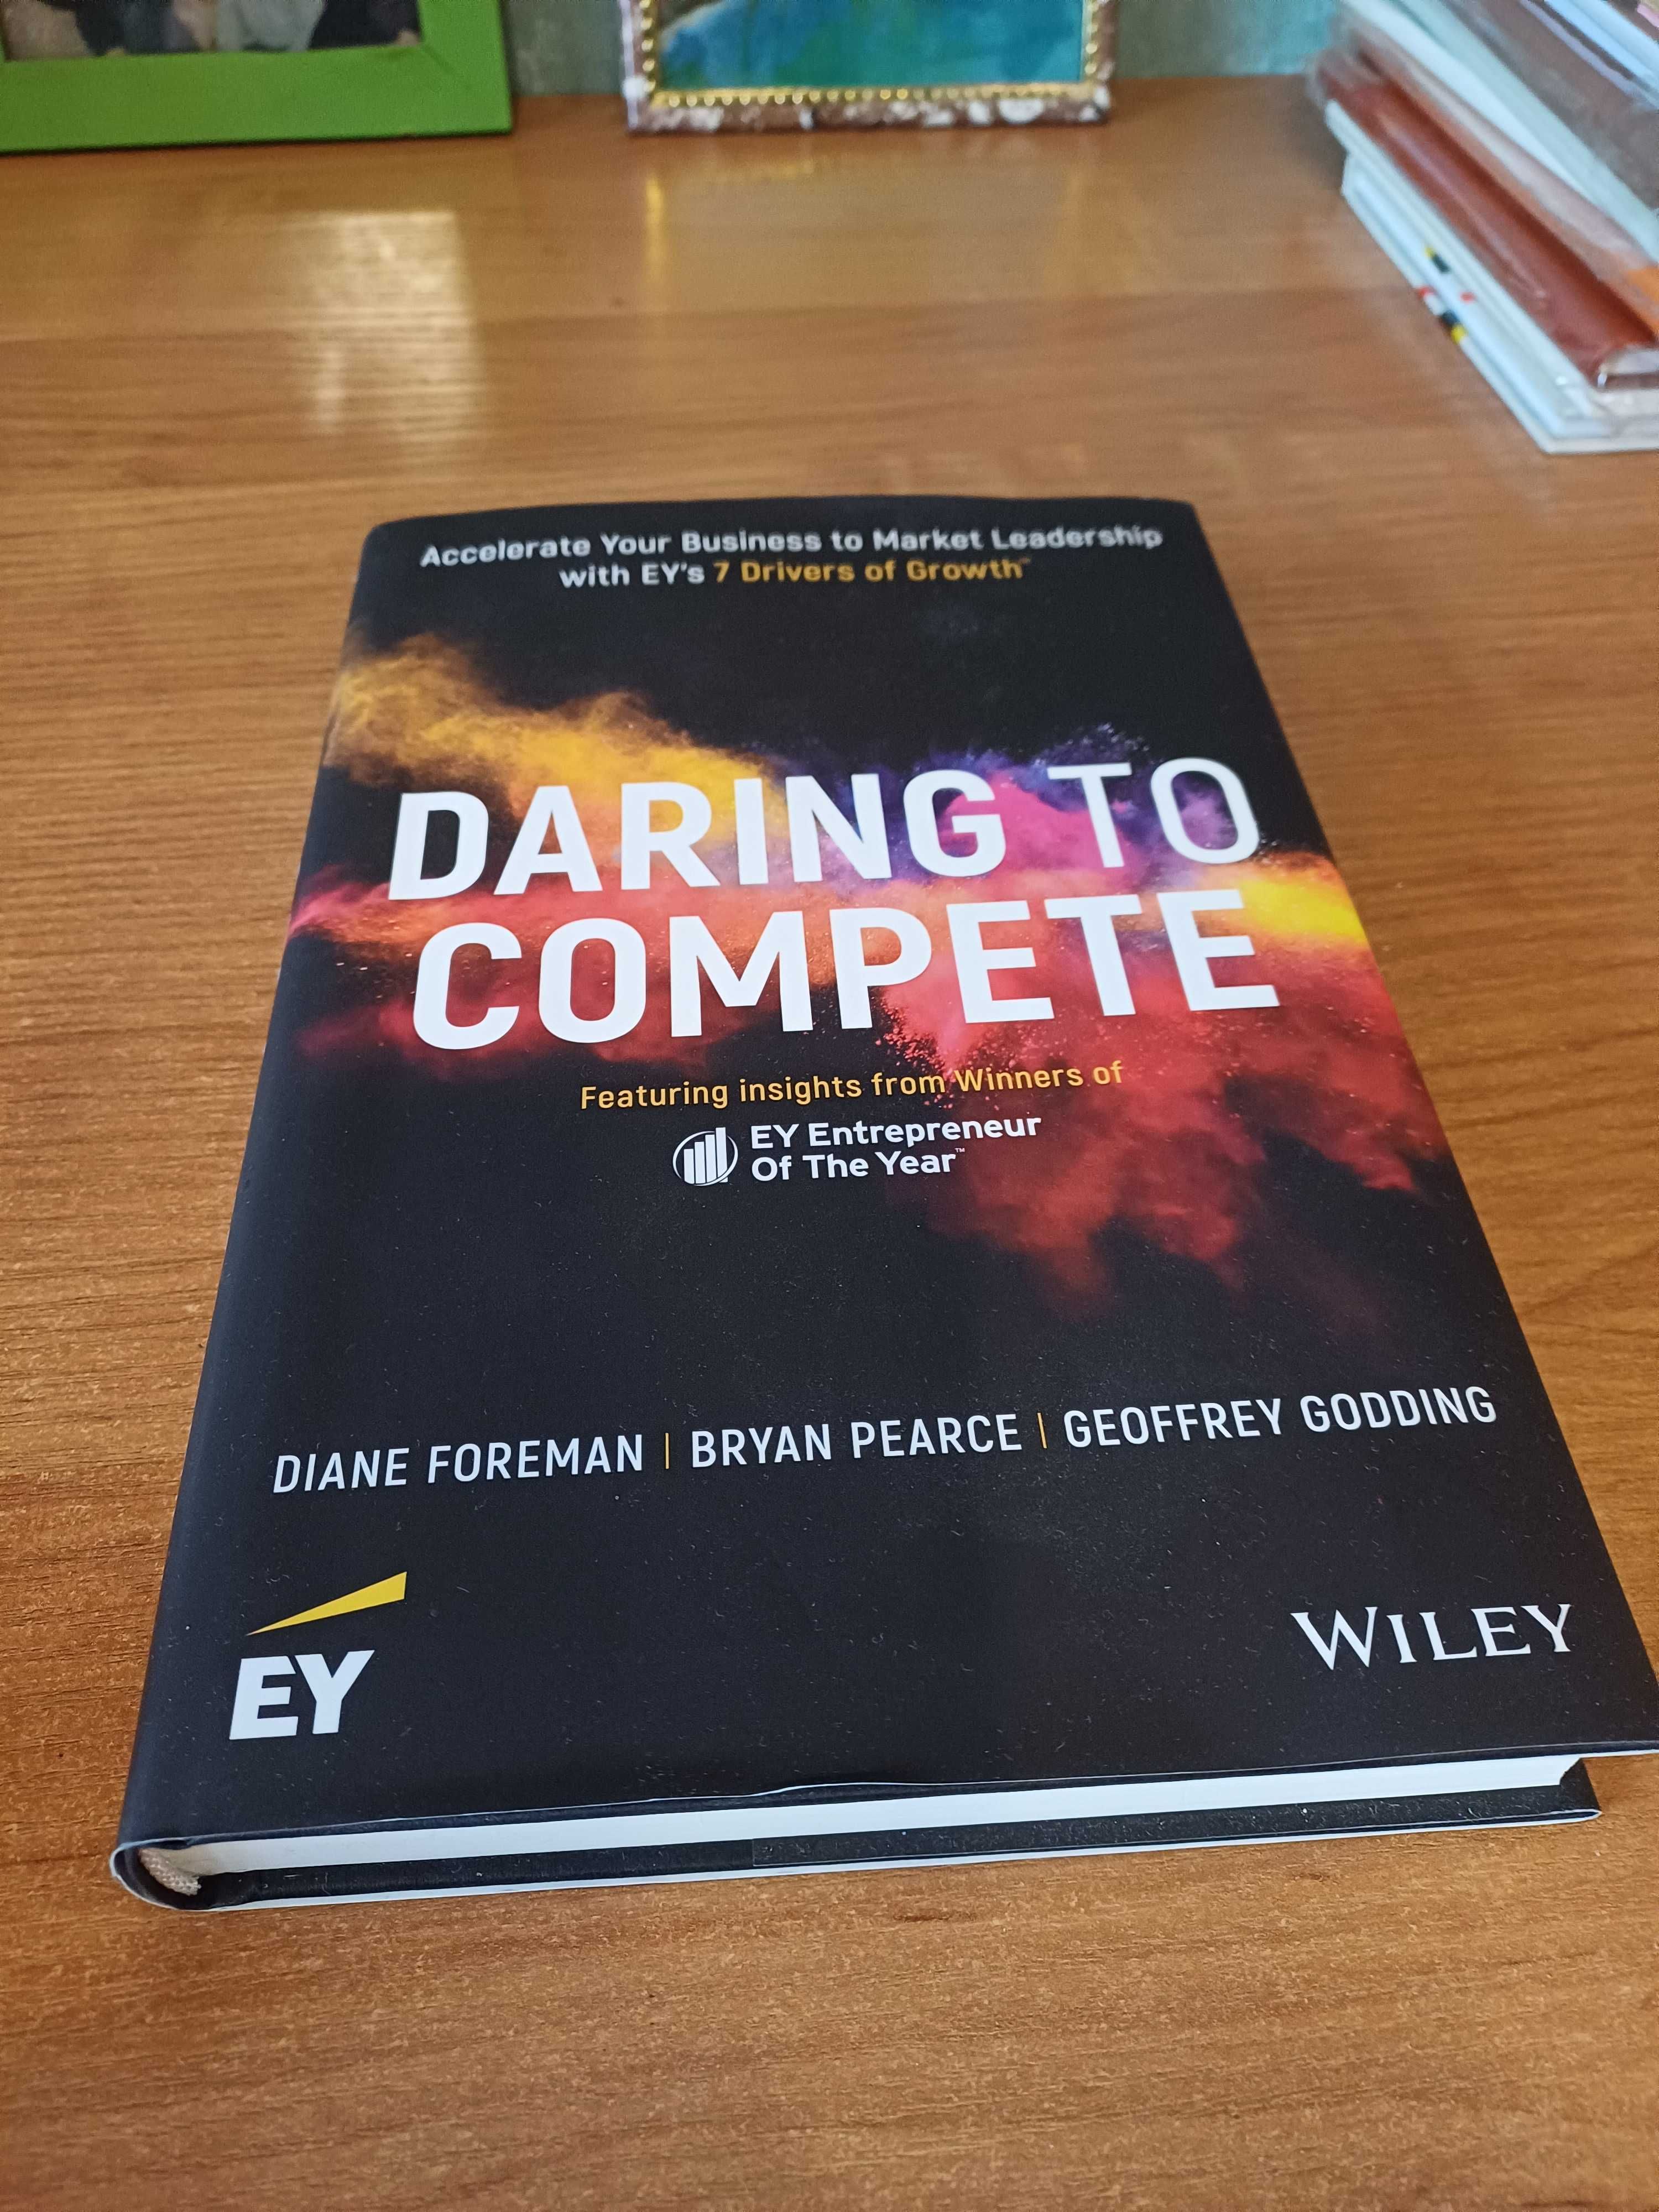 Книга от Ernst and Young "Daring to complete"